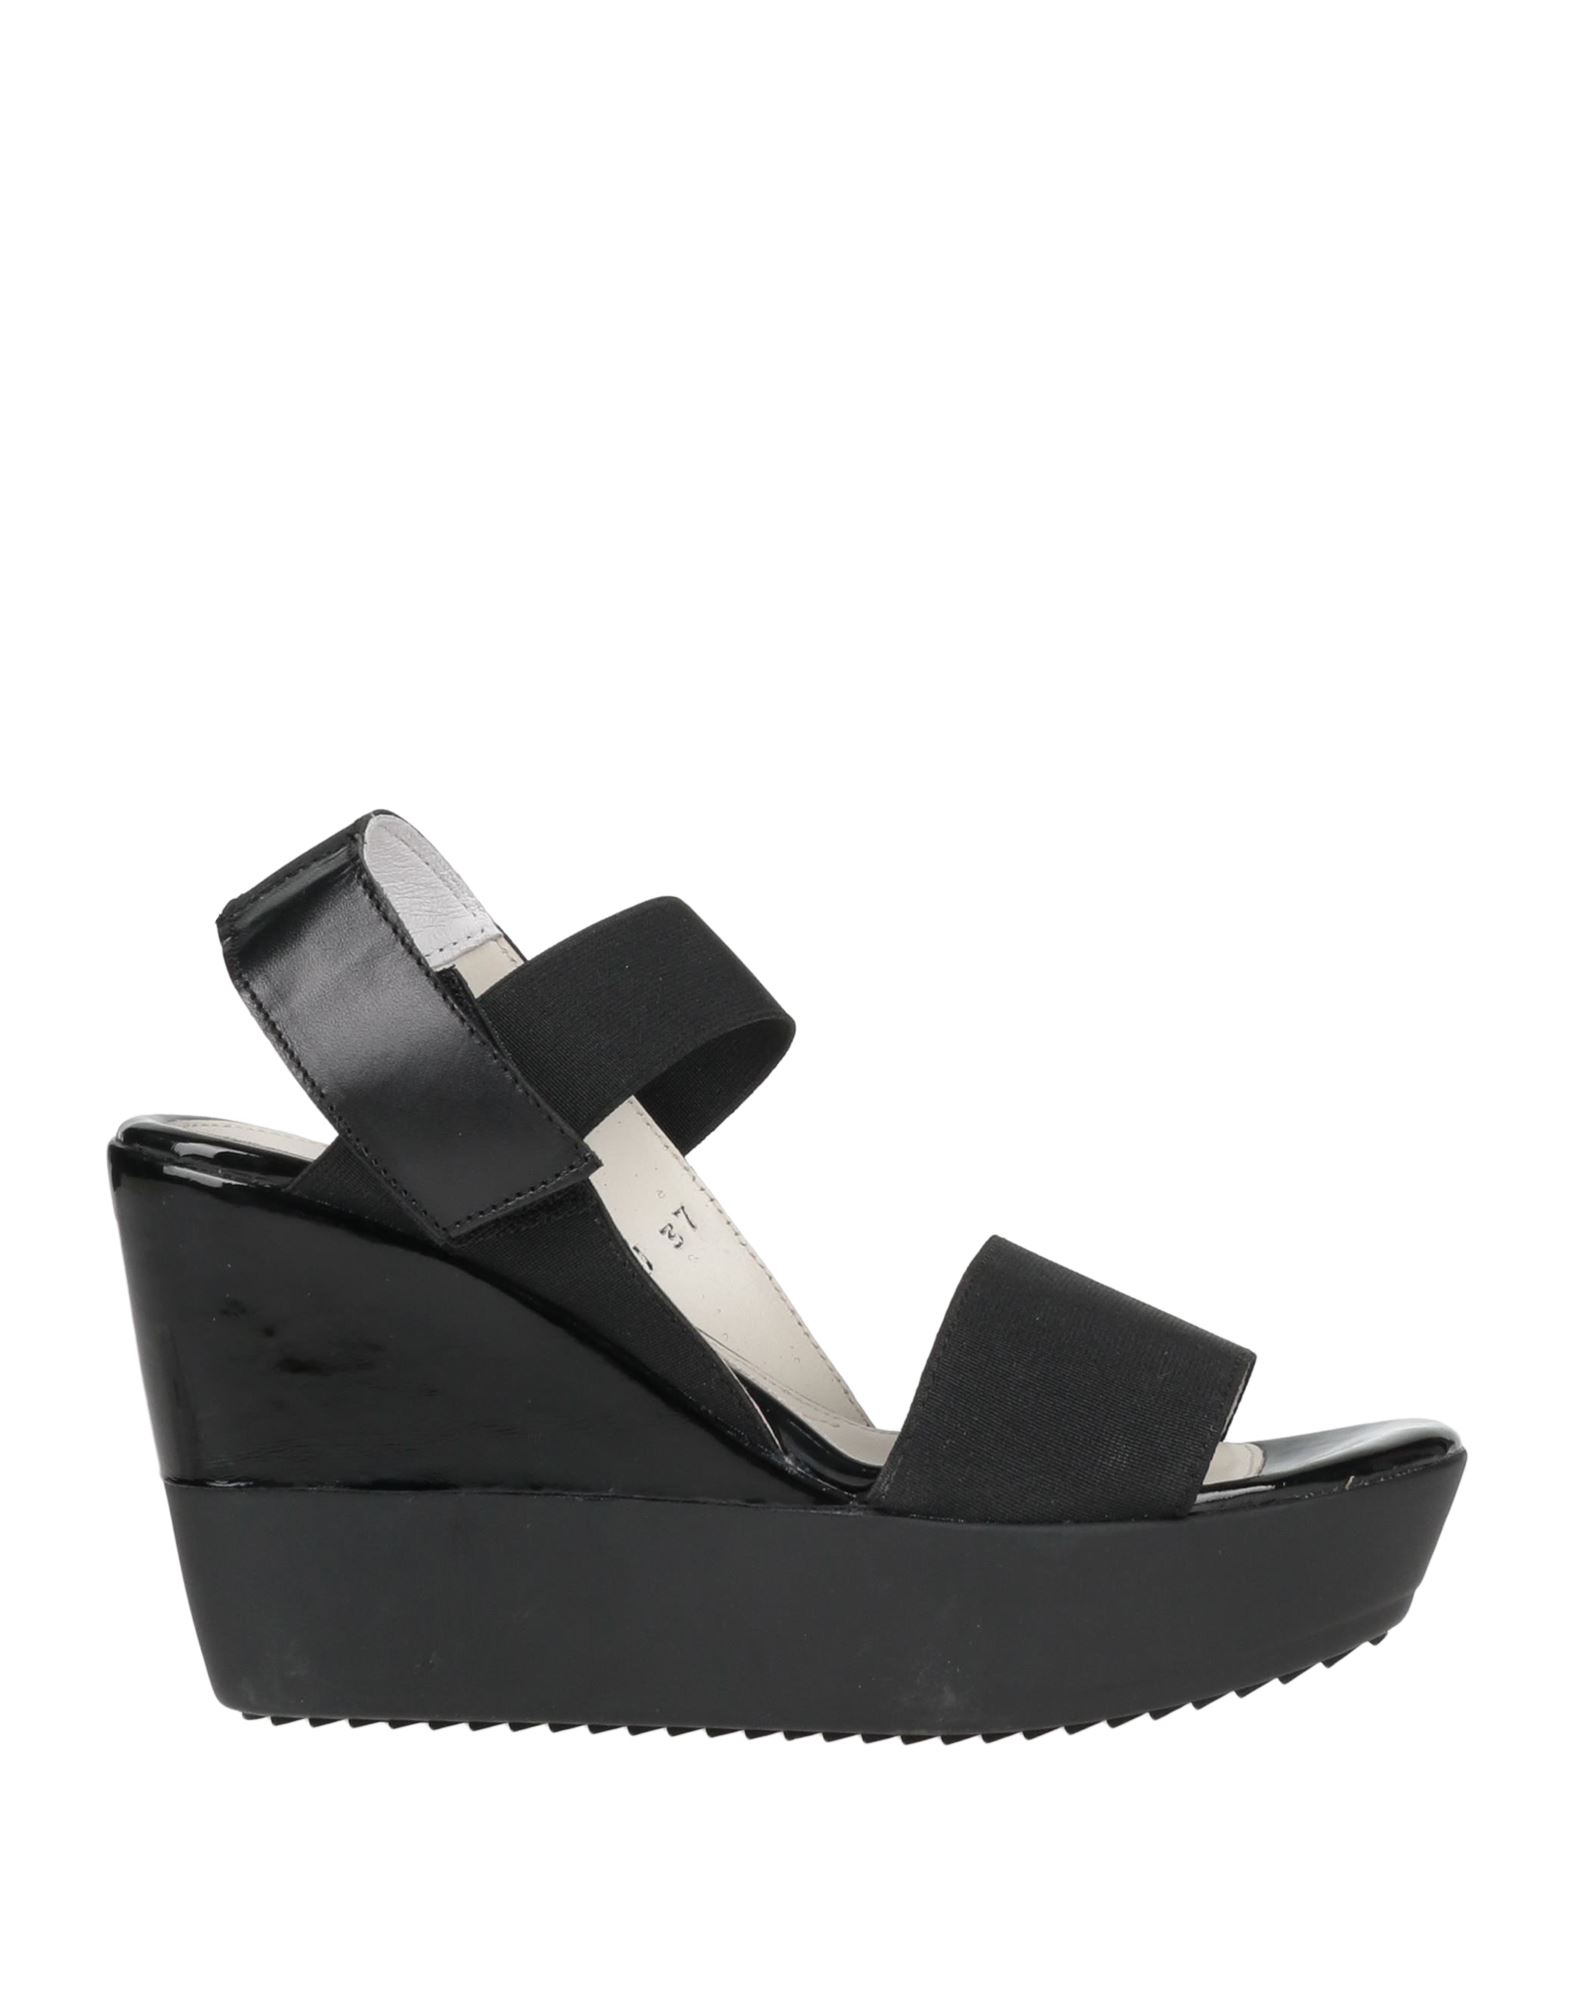 Stonefly Sandals In Black